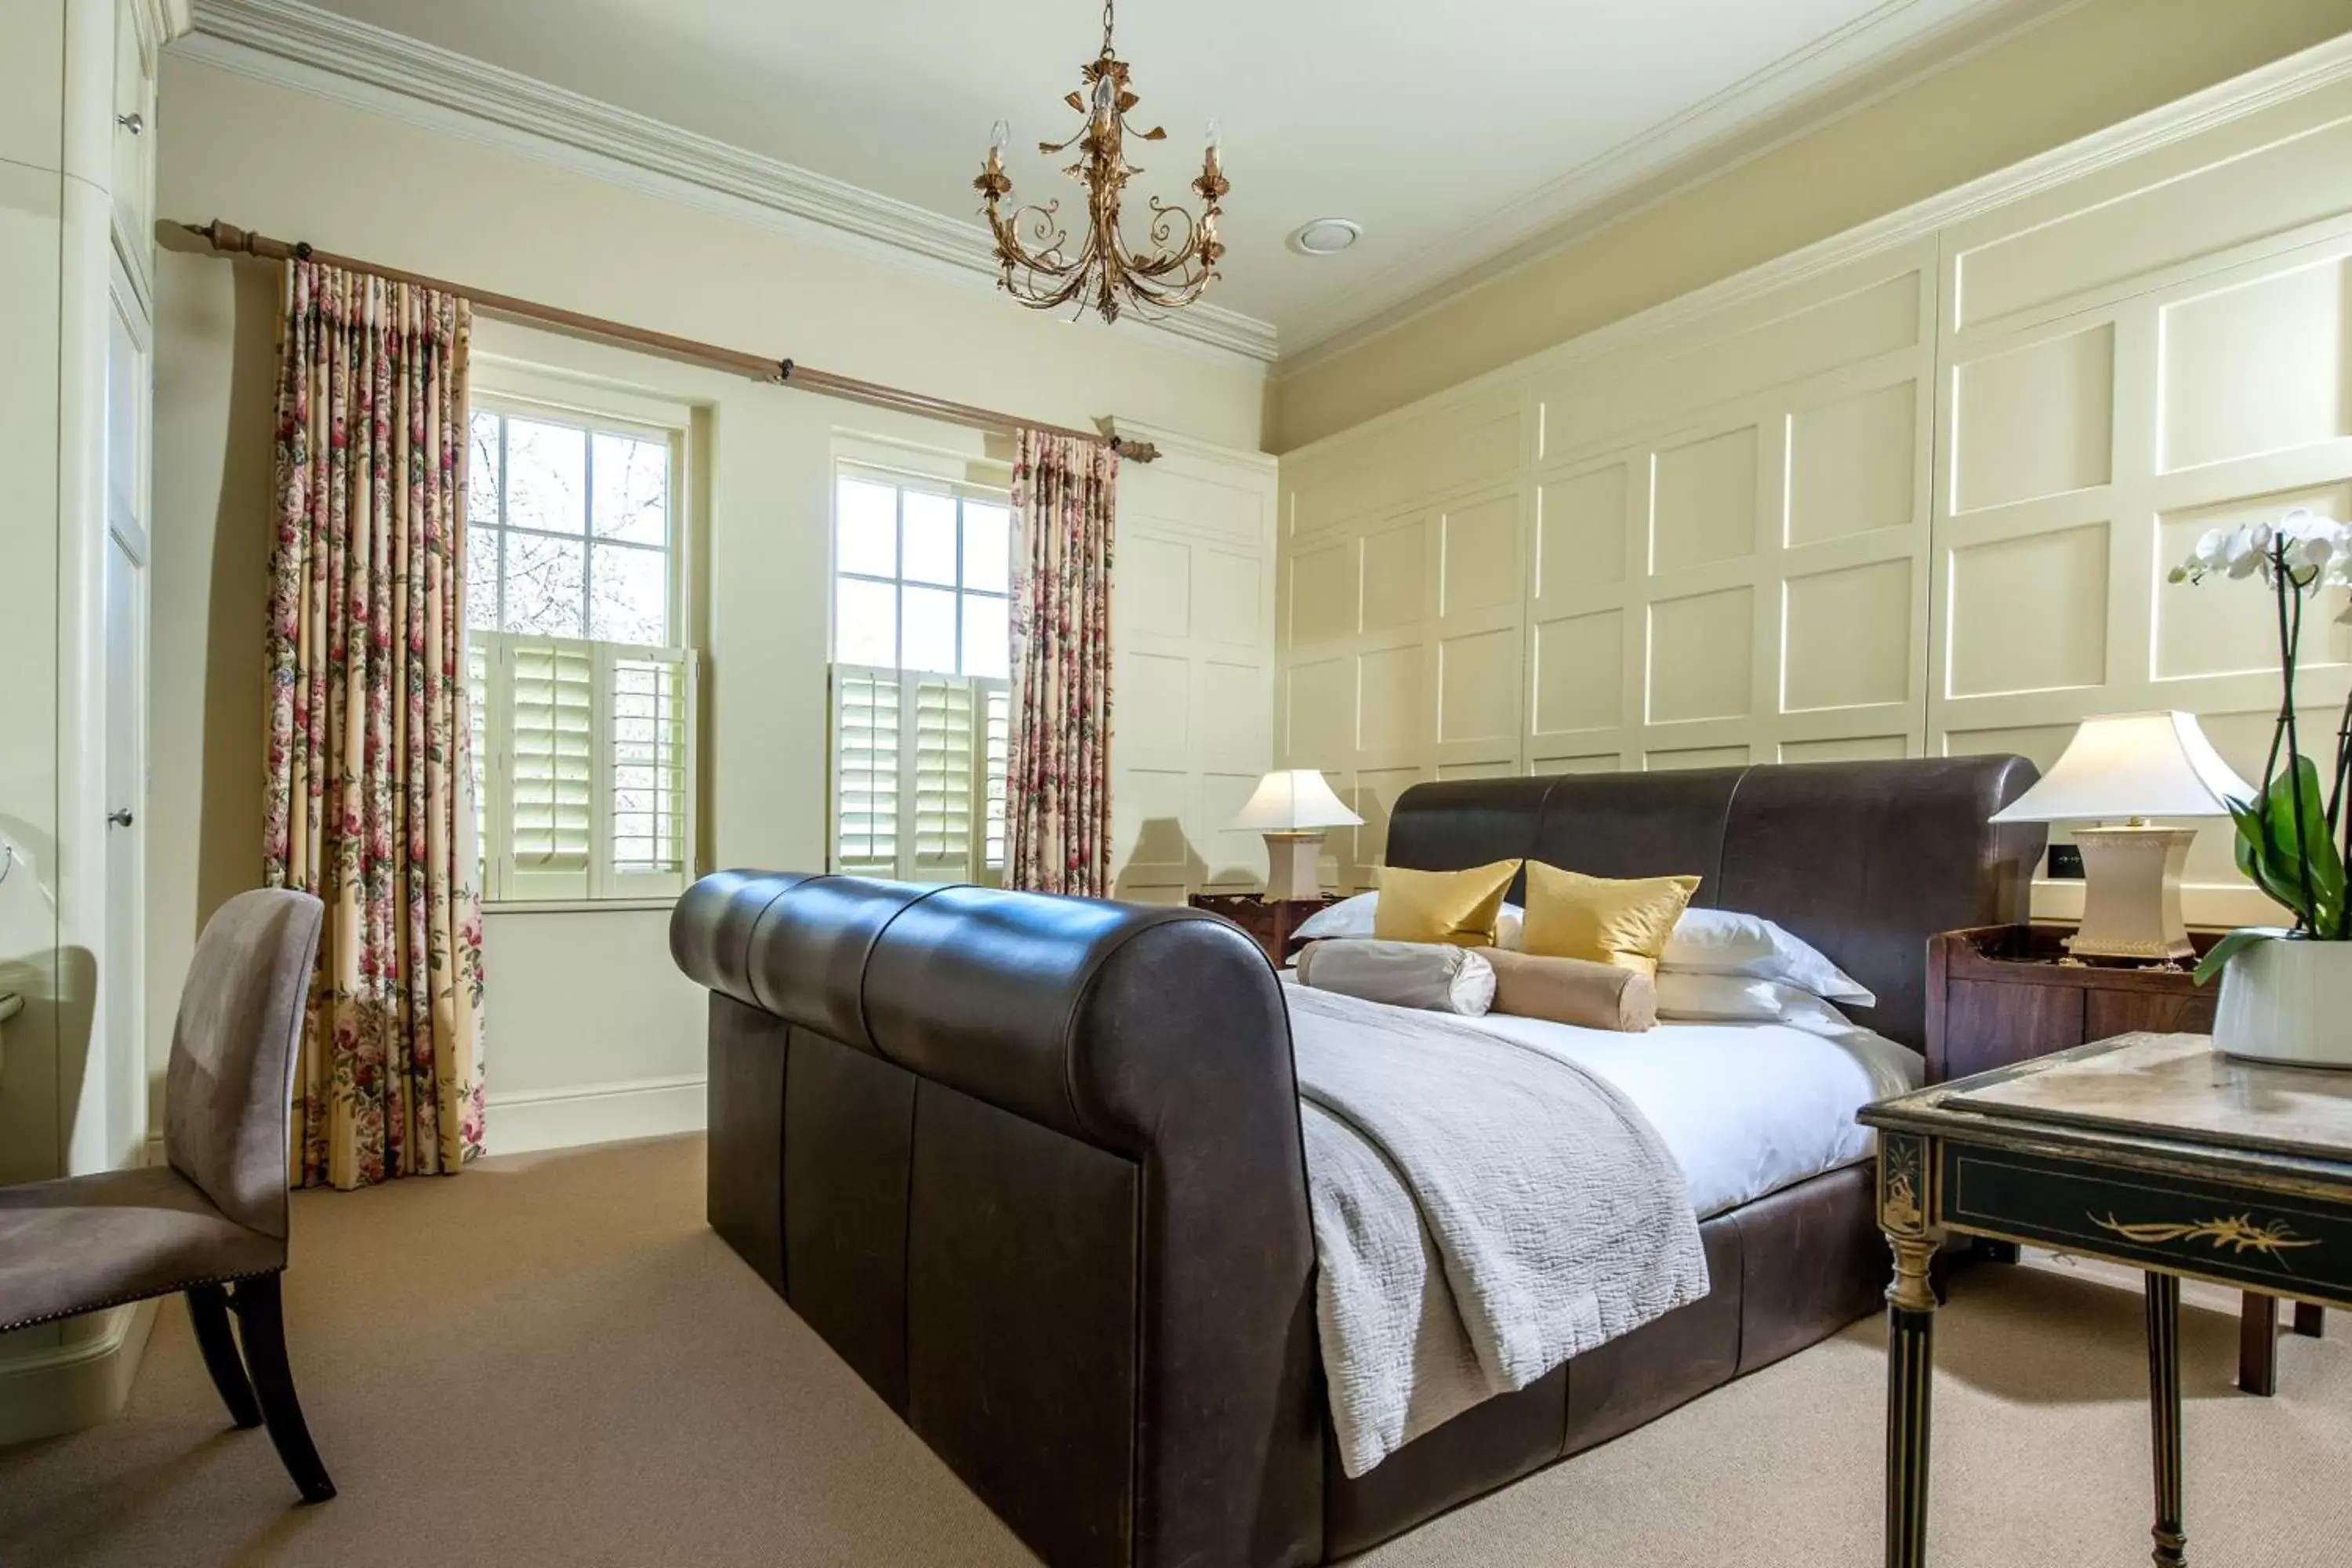 Bedroom in The Bath Priory - A Relais & Chateaux Hotel